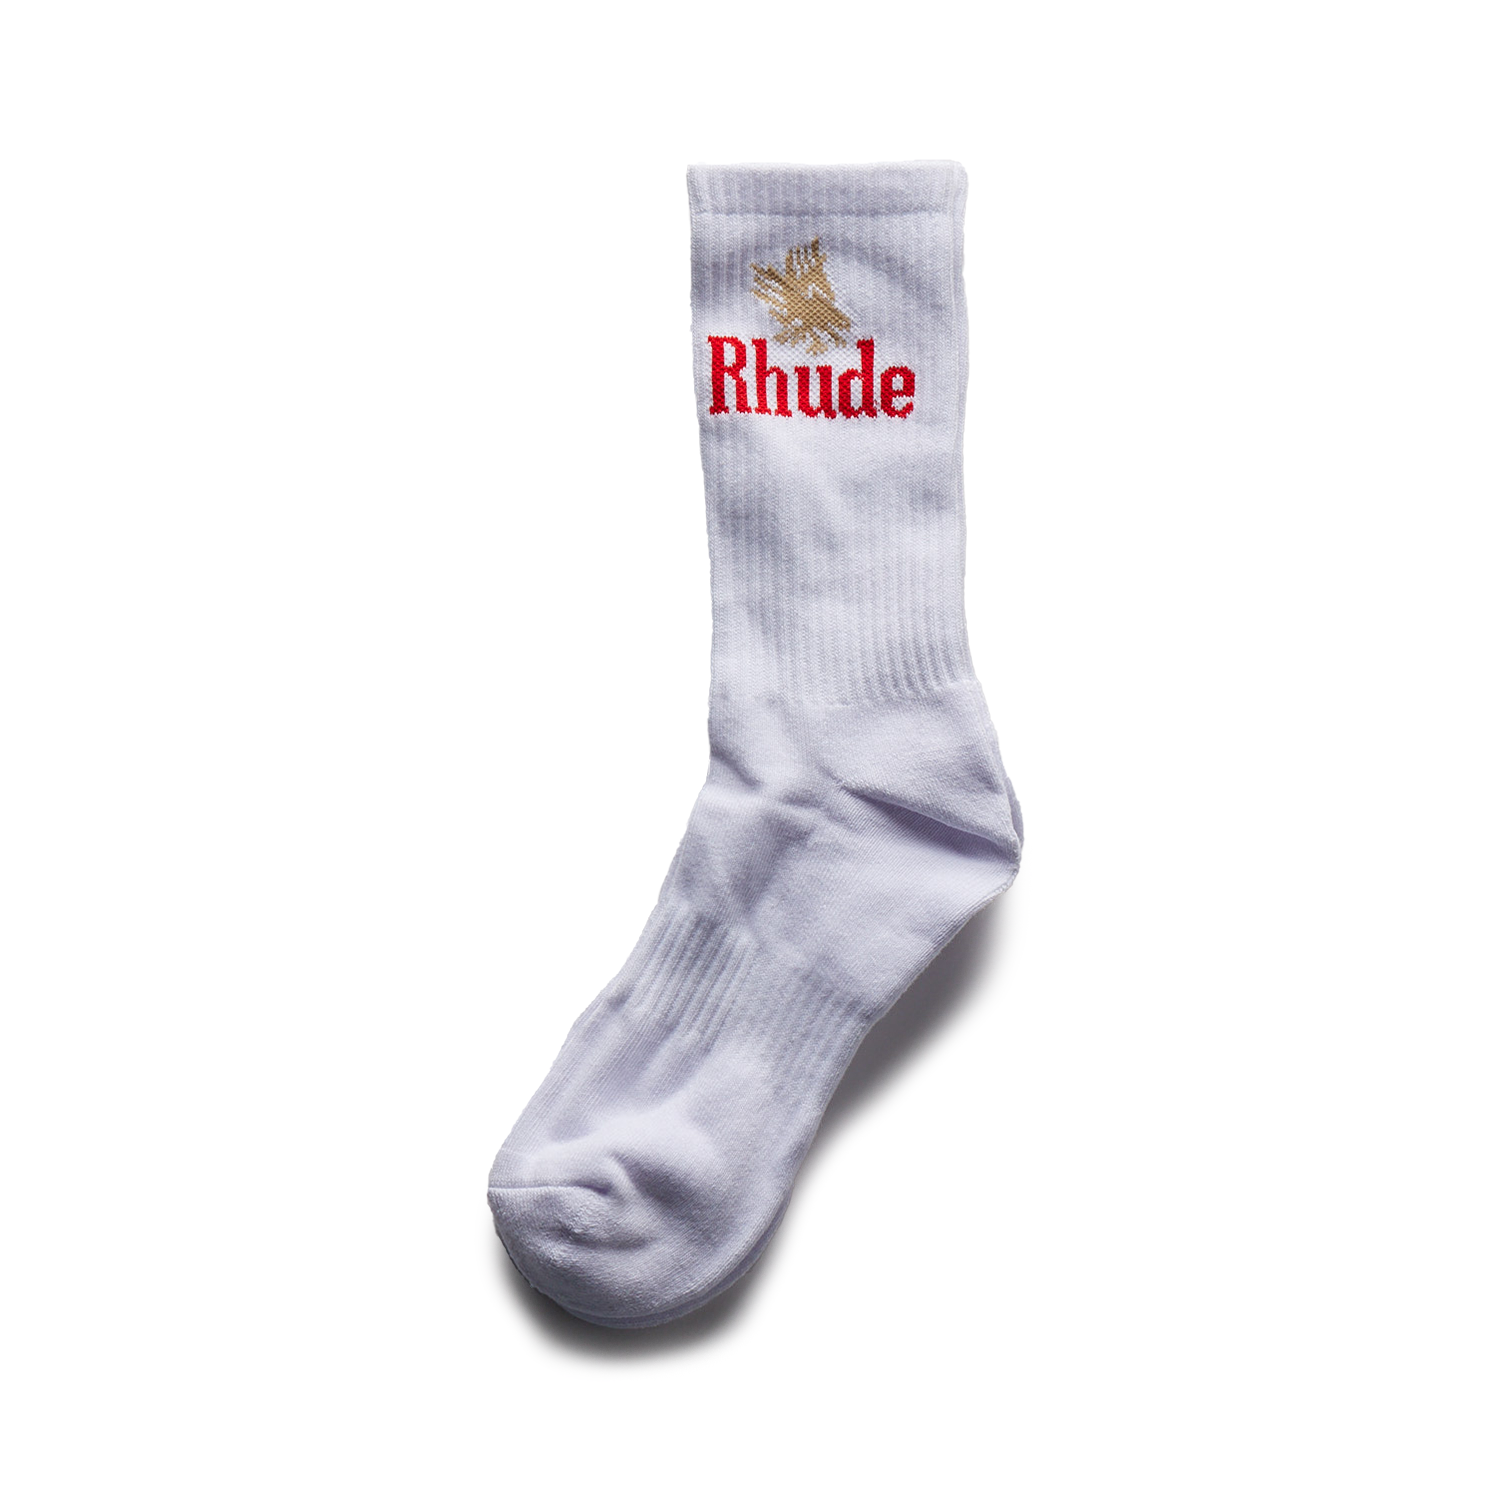 RHUDE - Eagles Sock (White/Red) product image